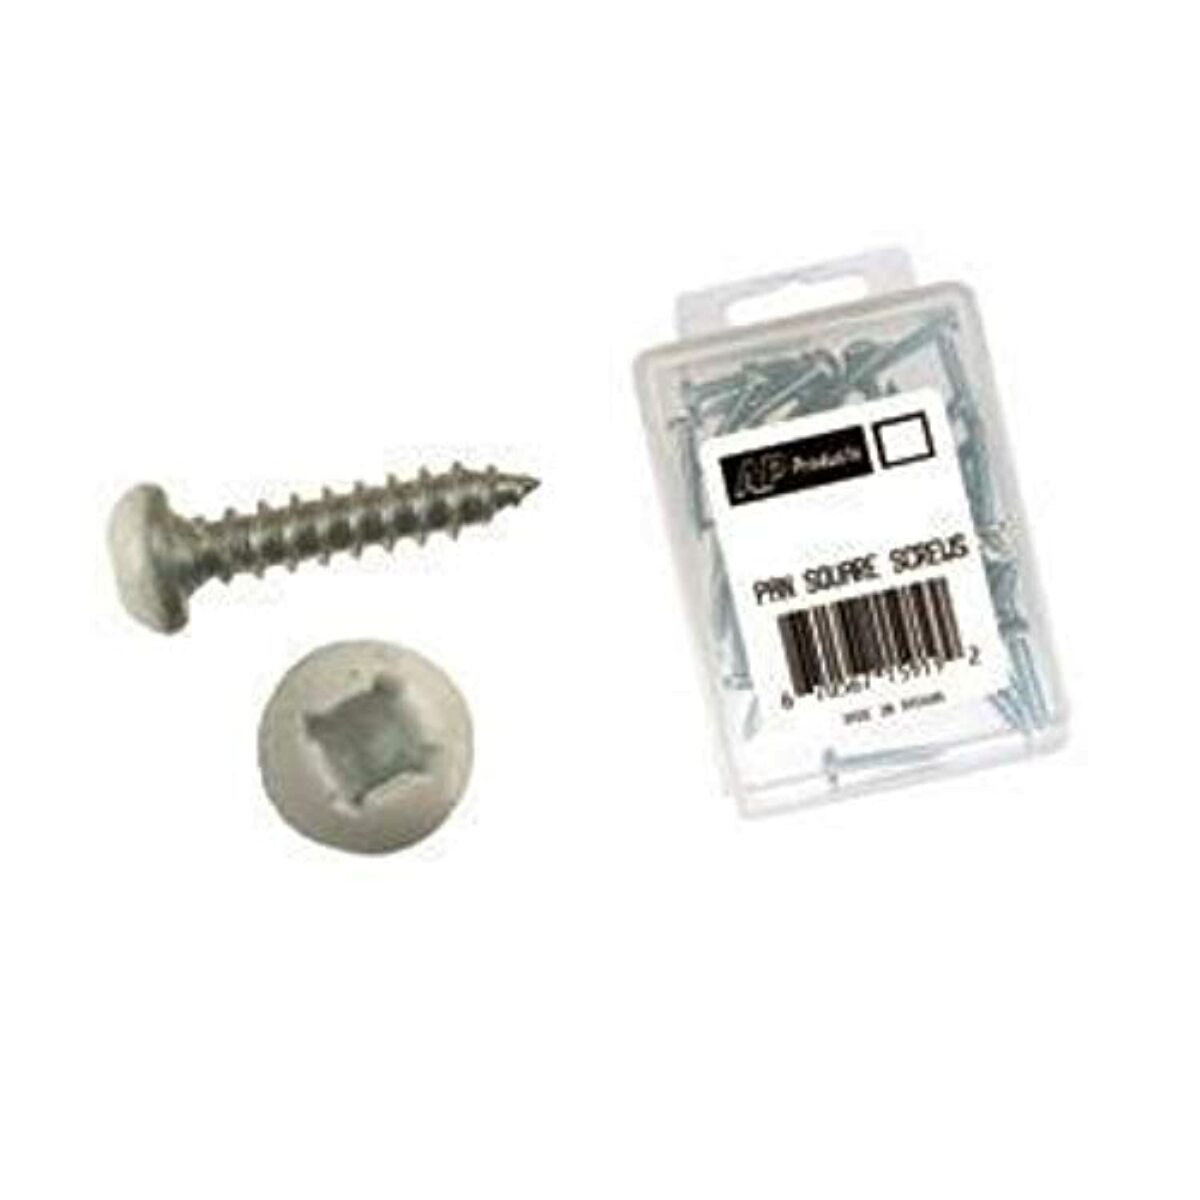 AP Products 012-PSQ50W8X3/4 White 8 X 3/4" Pan Head/Square Recess Screw 50 Pack - image 3 of 6